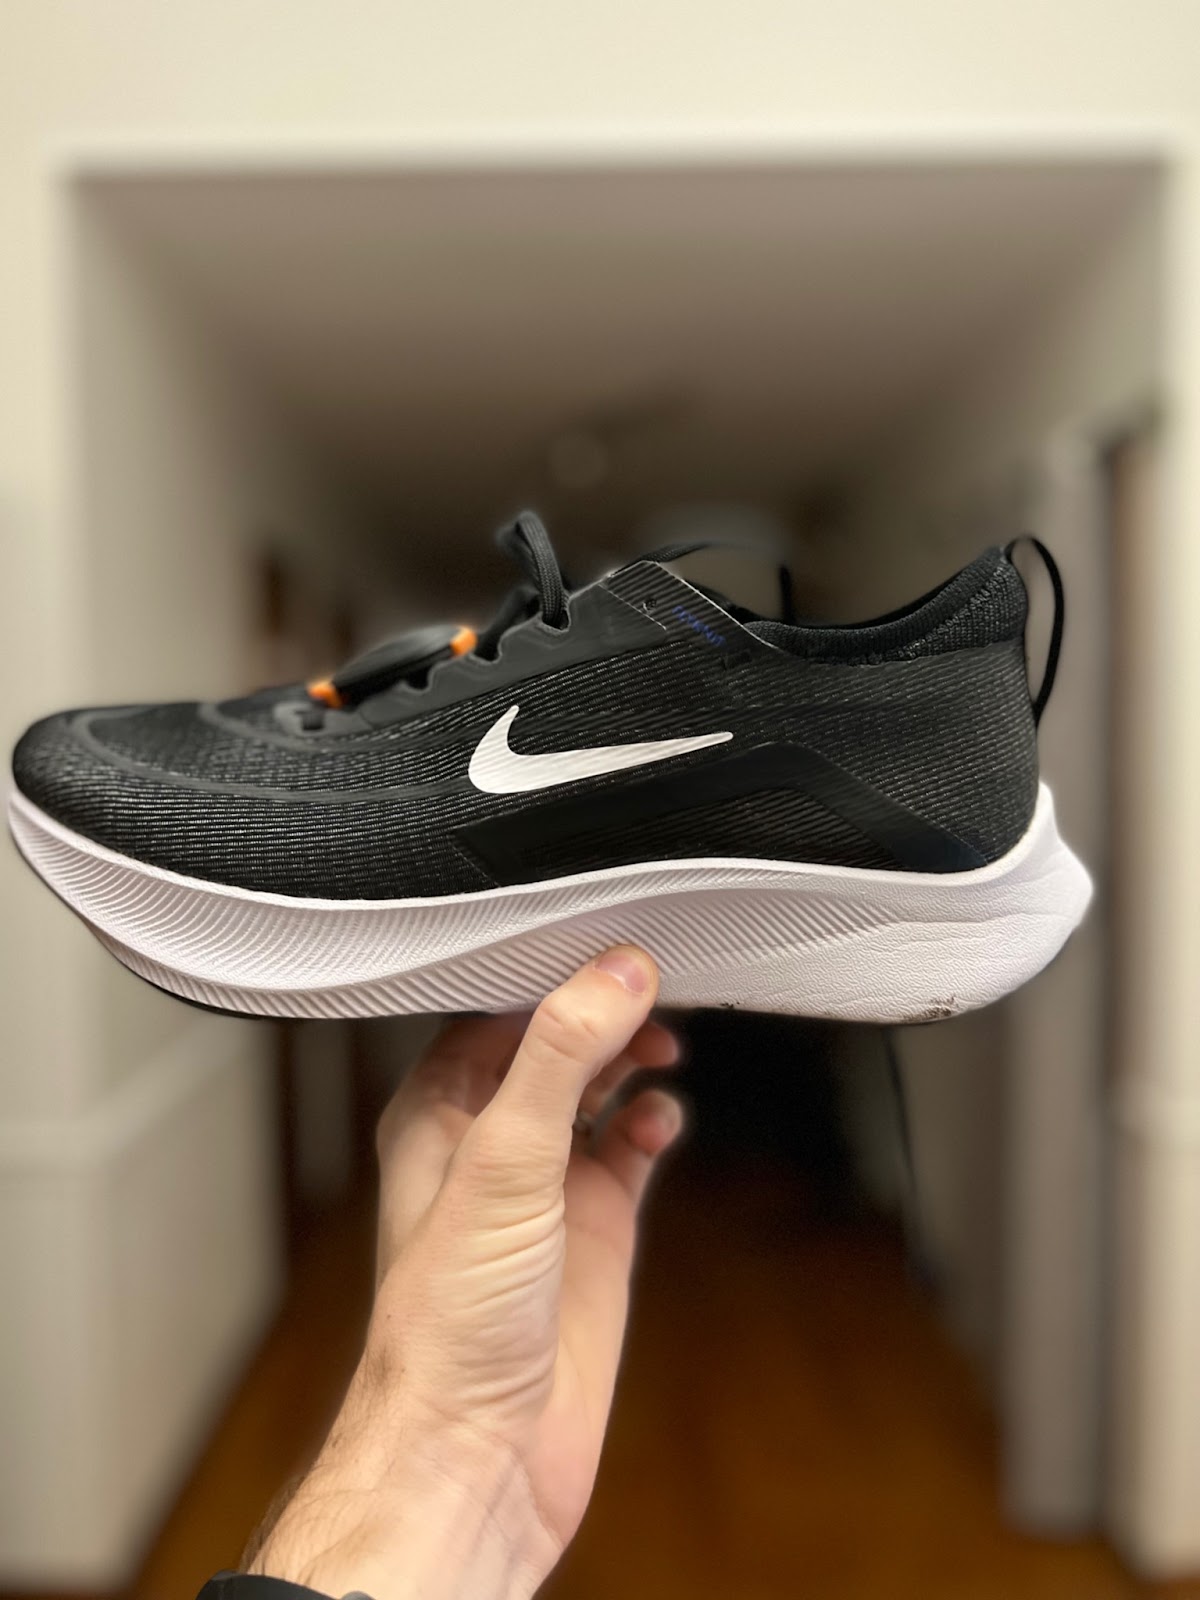 Breaking news booklet Moronic Road Trail Run: Nike Zoom Fly 4 Review